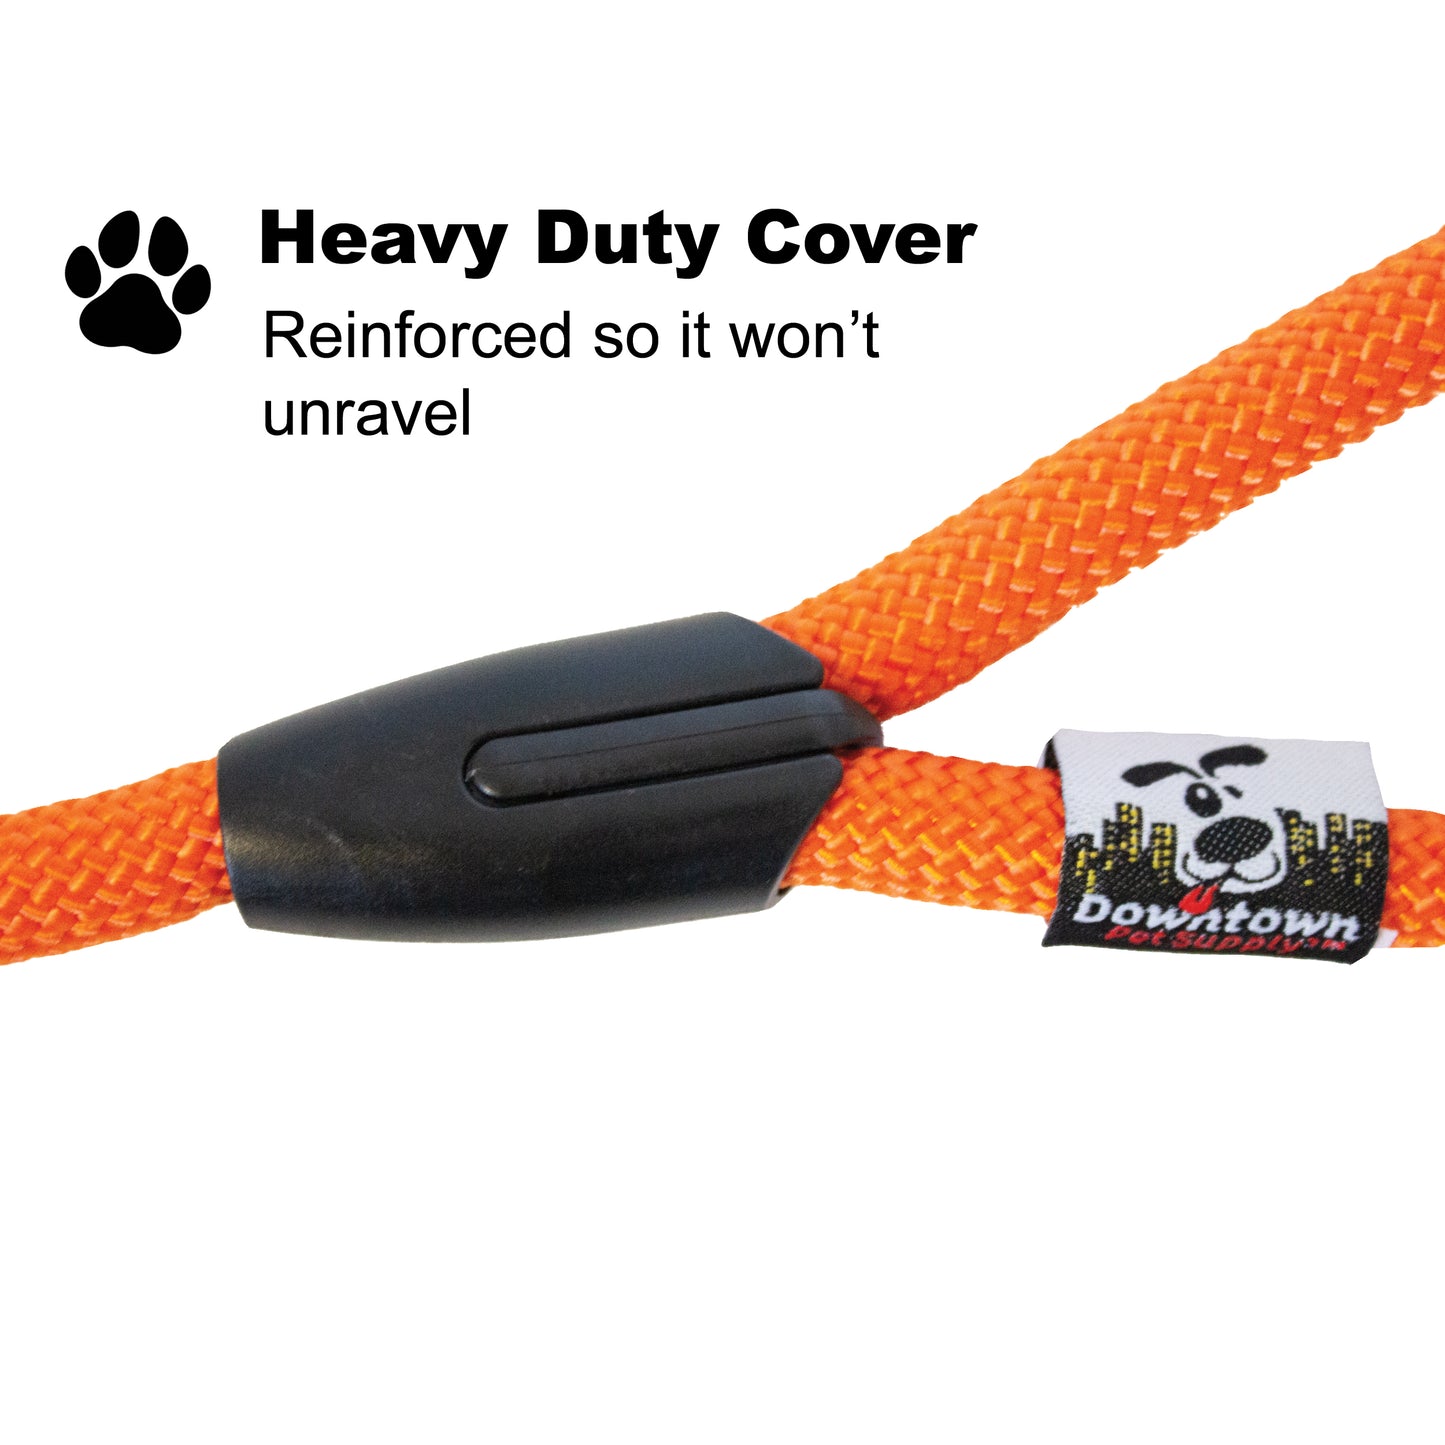 Heavy Duty Corded Dog Leash - Multi-Size and Color Options